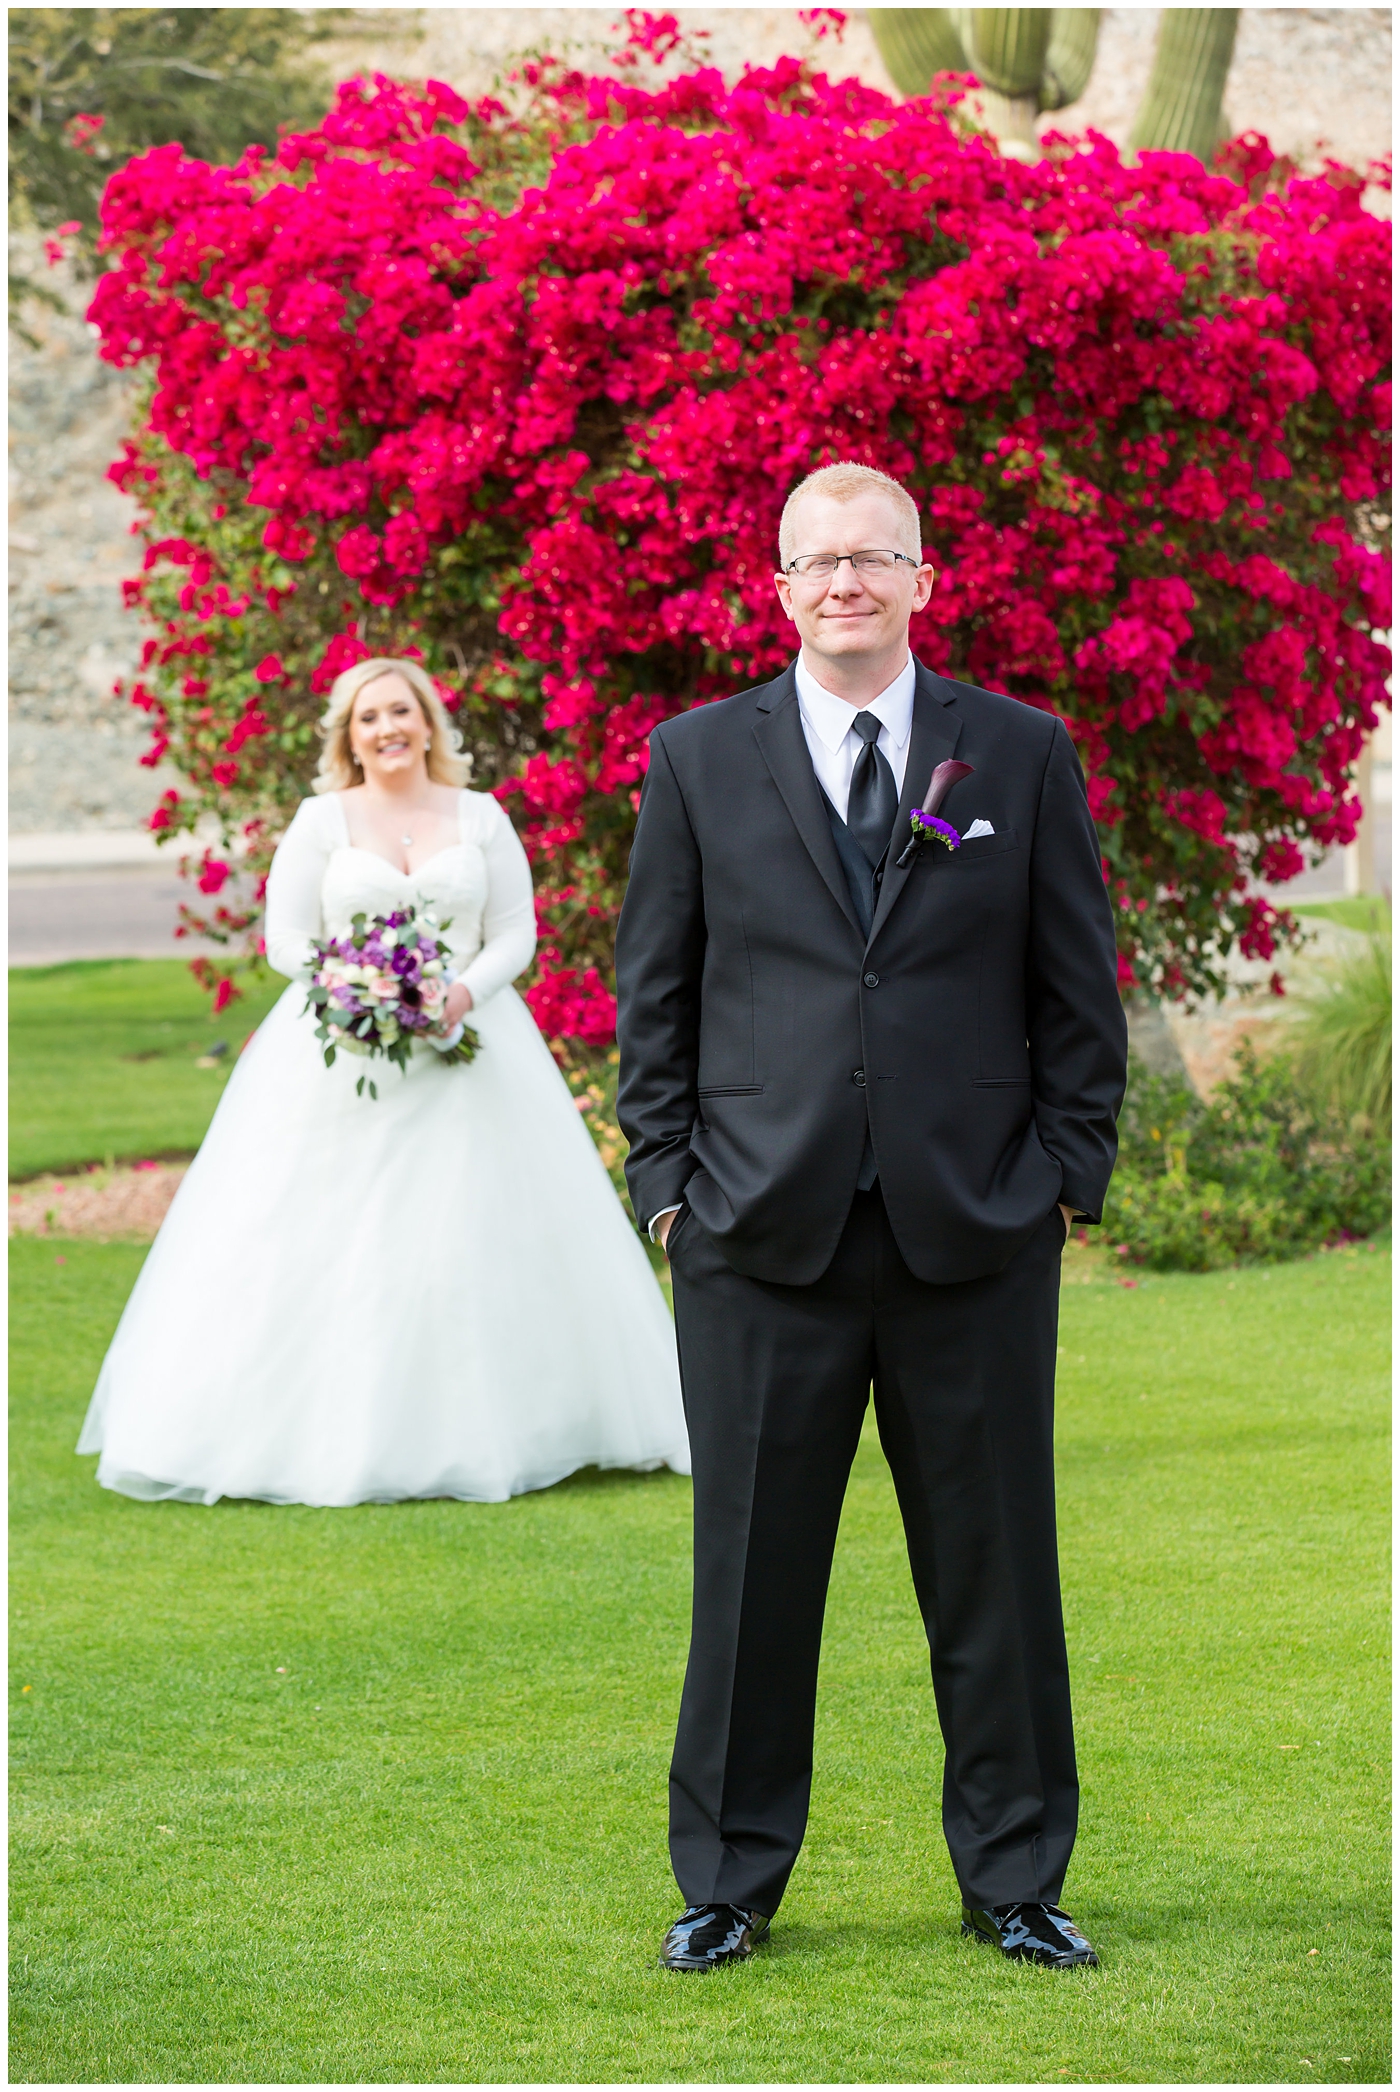 blonde bride in long sleeve wedding dress with purple and white flower bouquet and groom in black suit with purple calla lilly boutonniere first look on wedding day